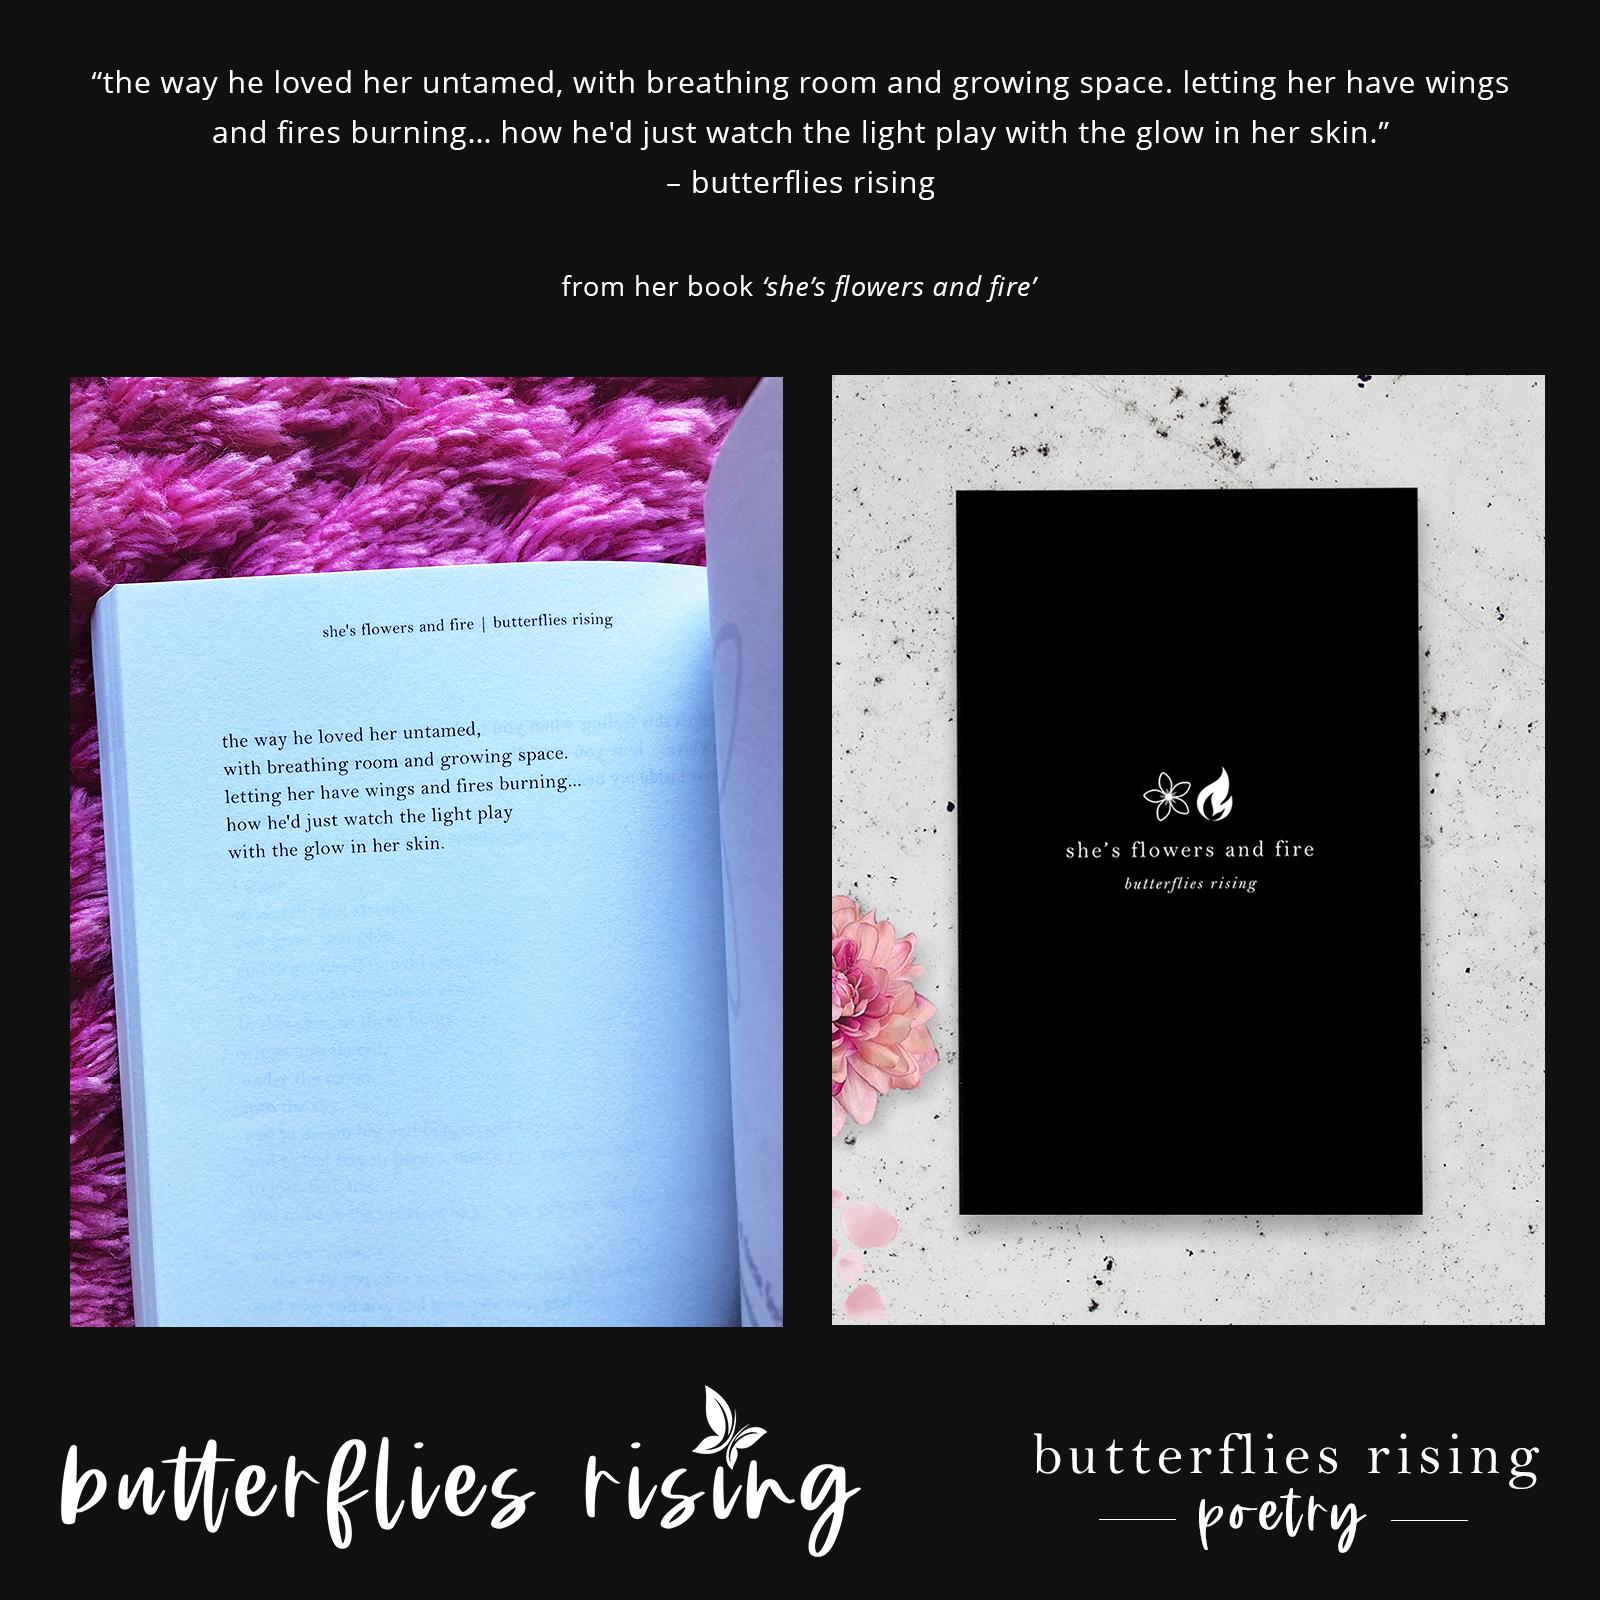 the way he loved her untamed, with breathing room and growing space - butterflies rising